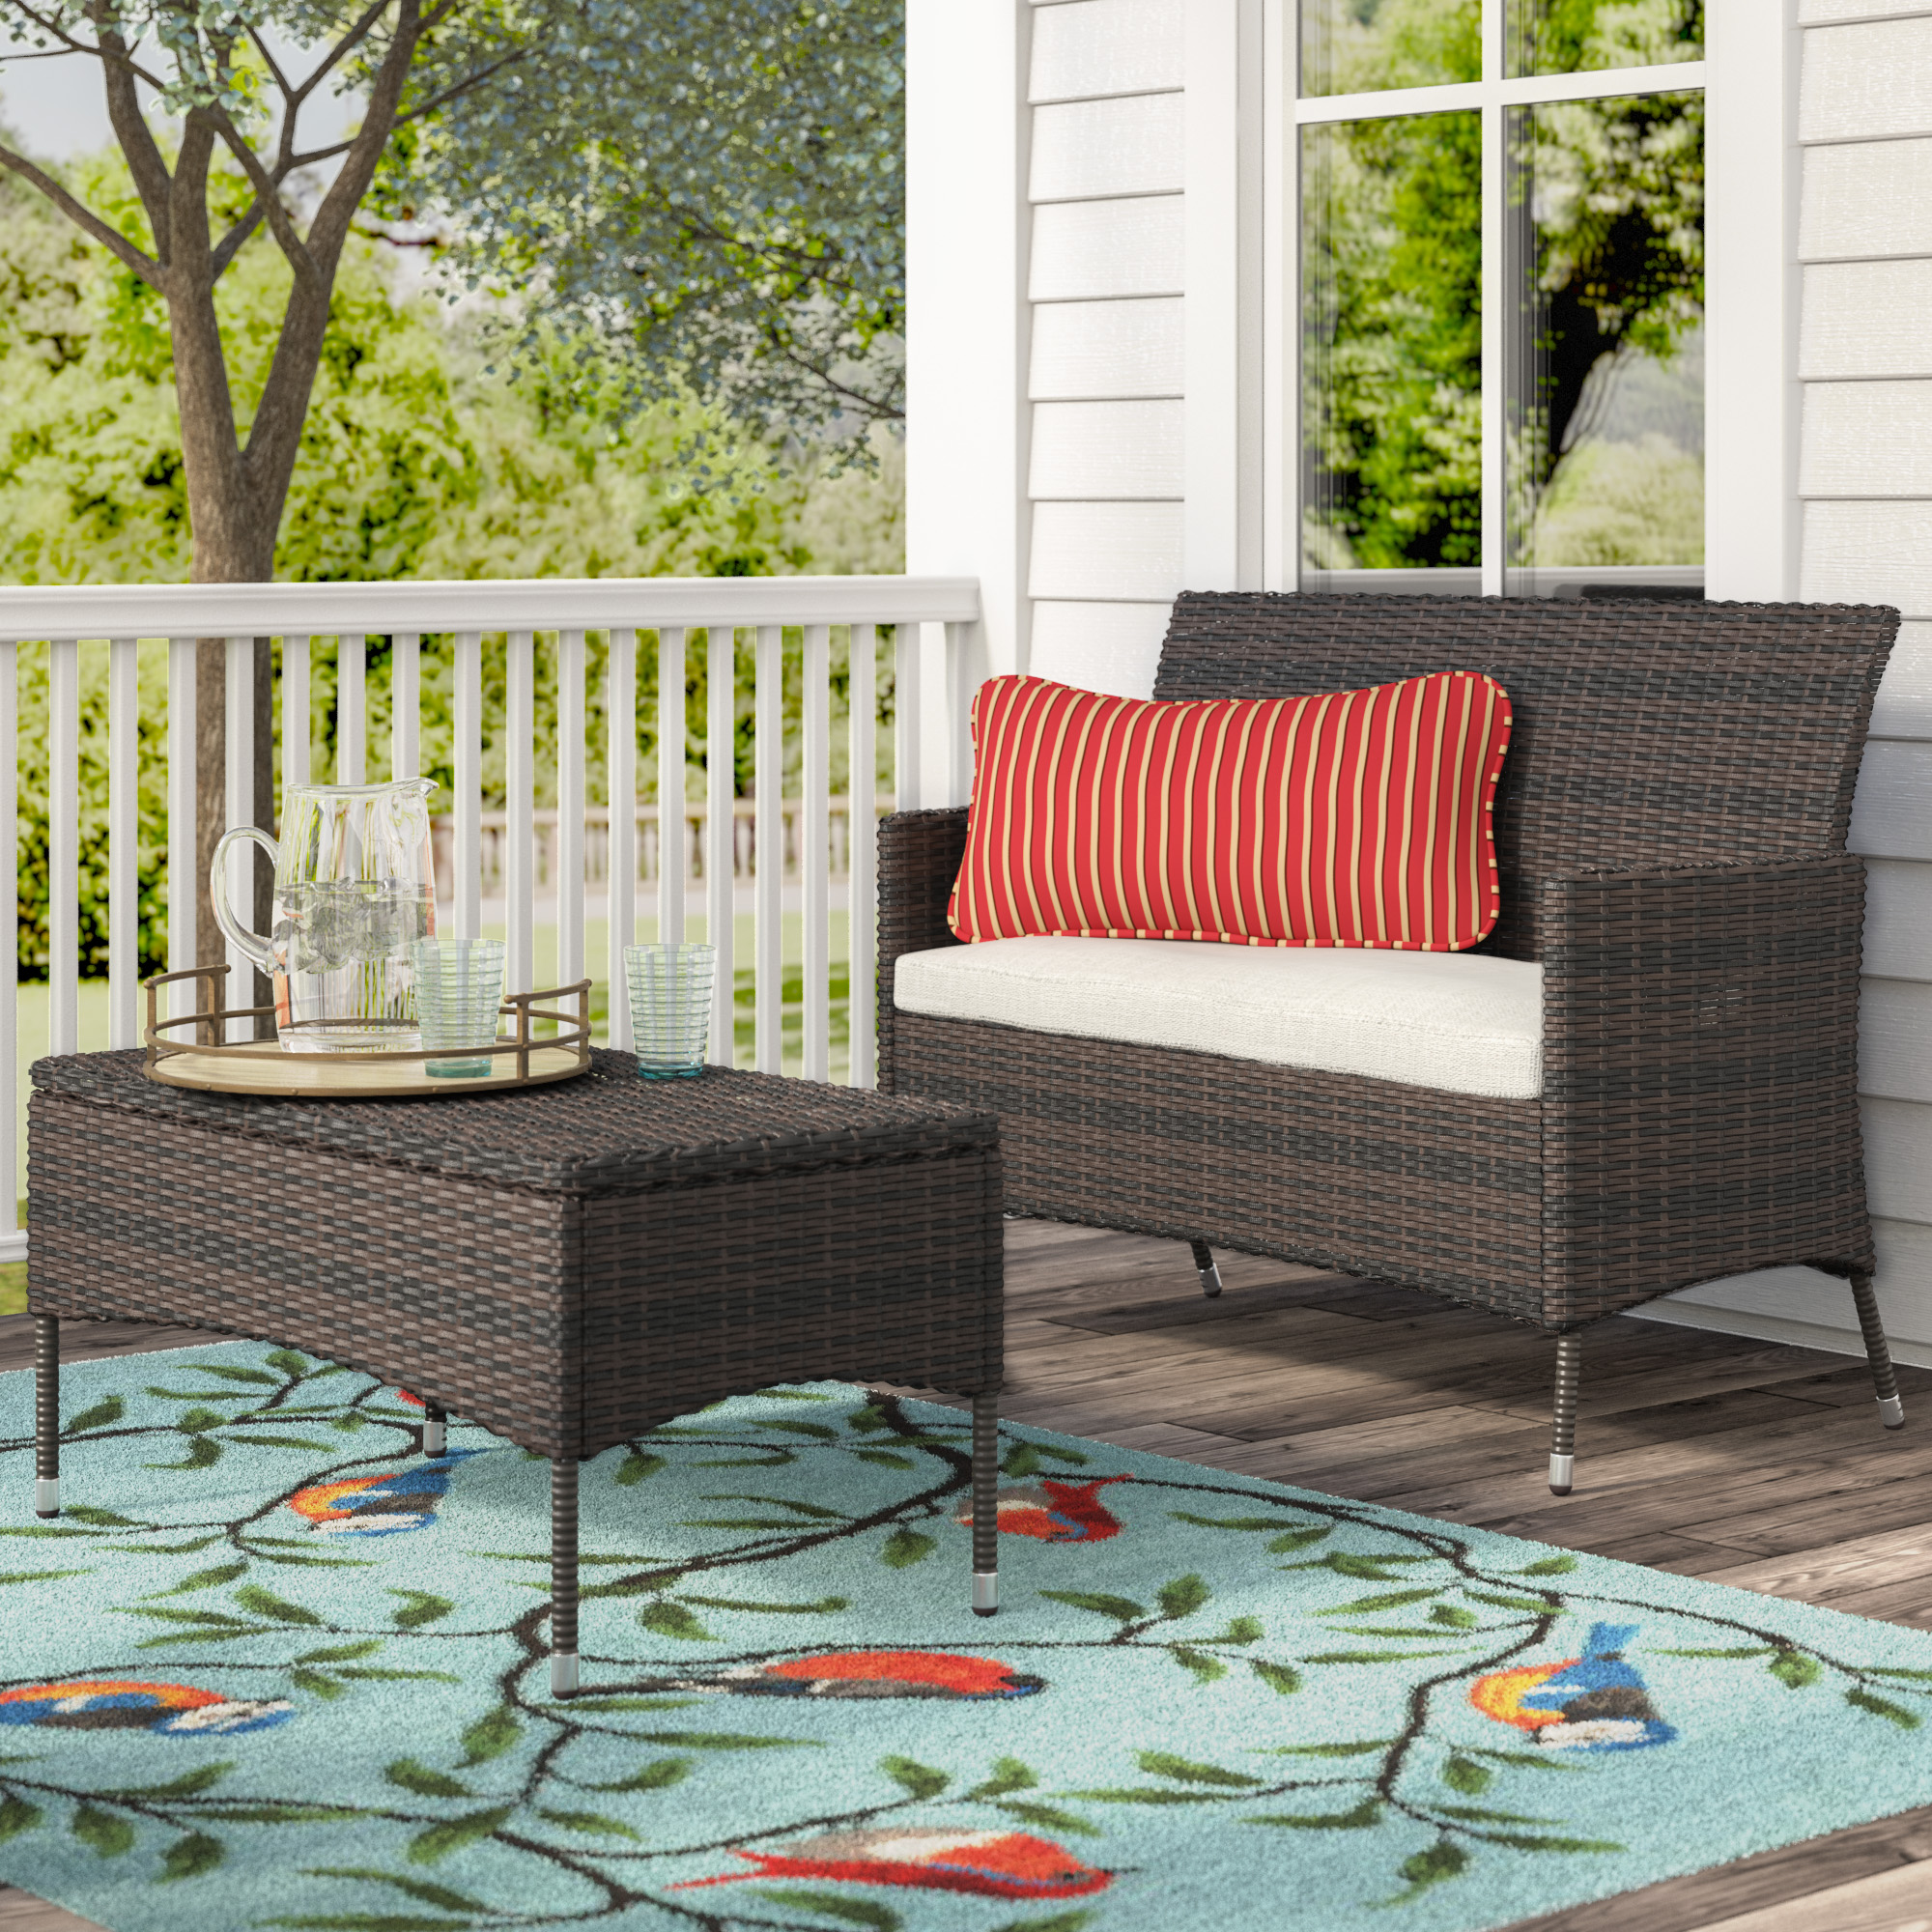 Outdoor rug on porch with rattan furniture